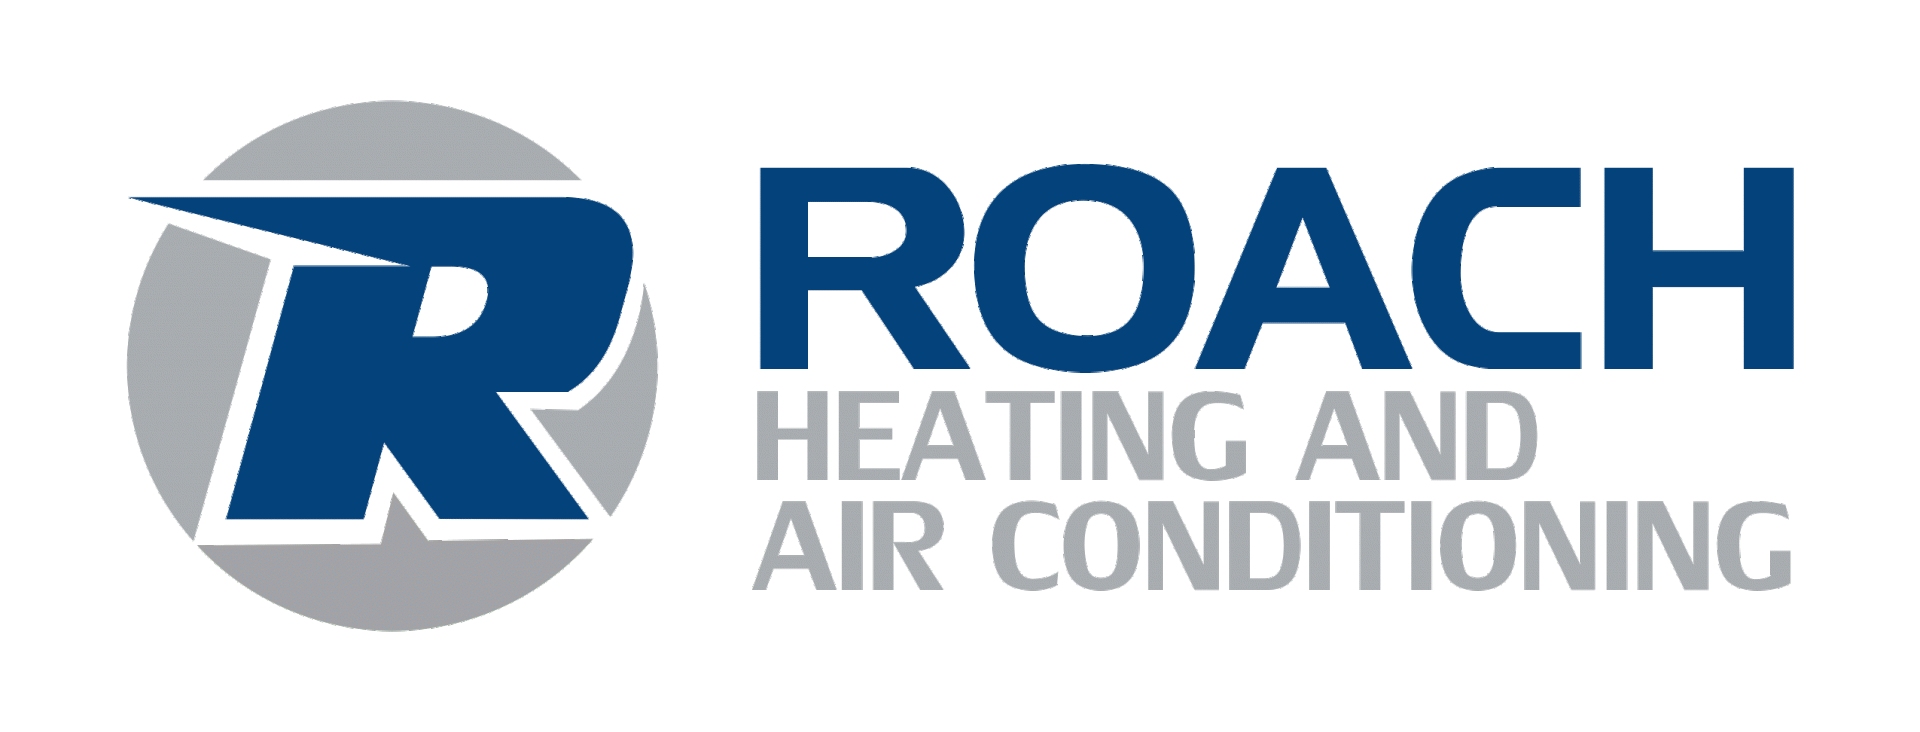 Roach Heating and Air-conditioning company logo